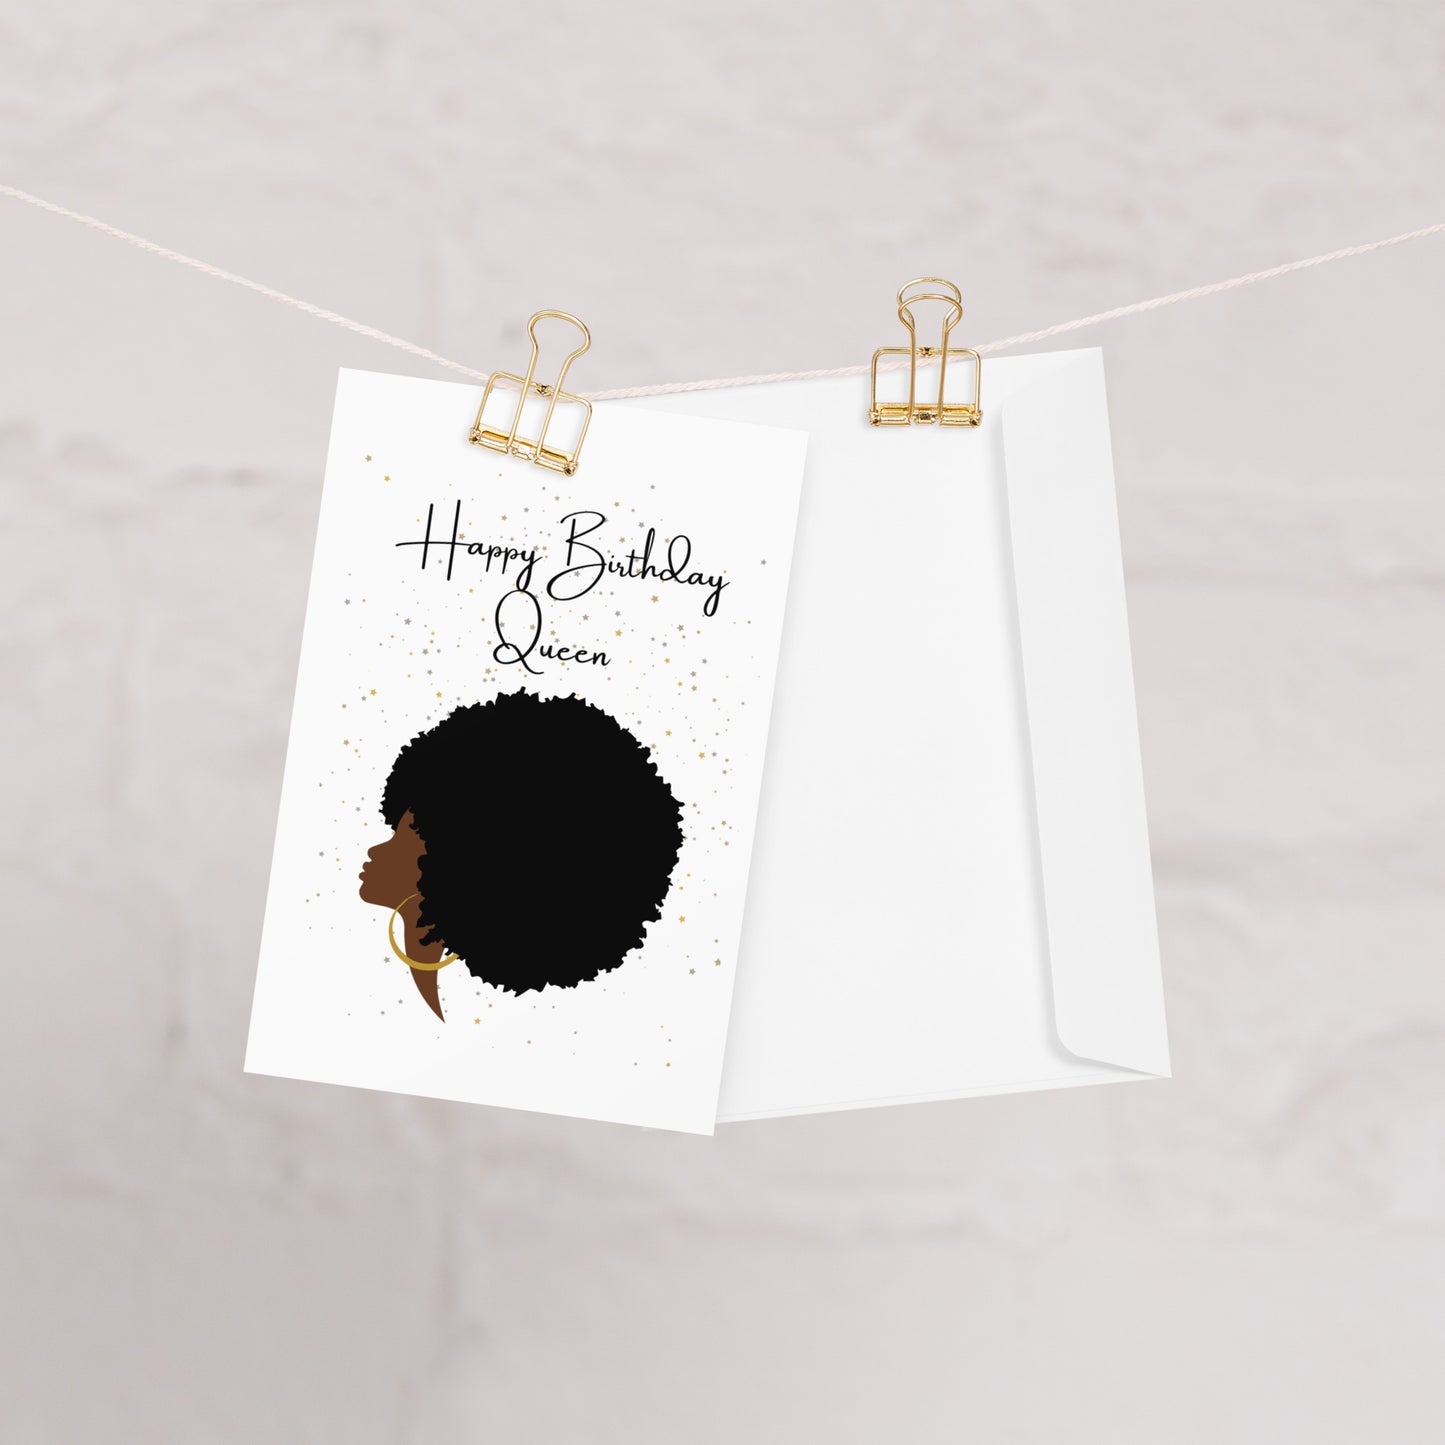 Happy Birthday Queen Greeting Card